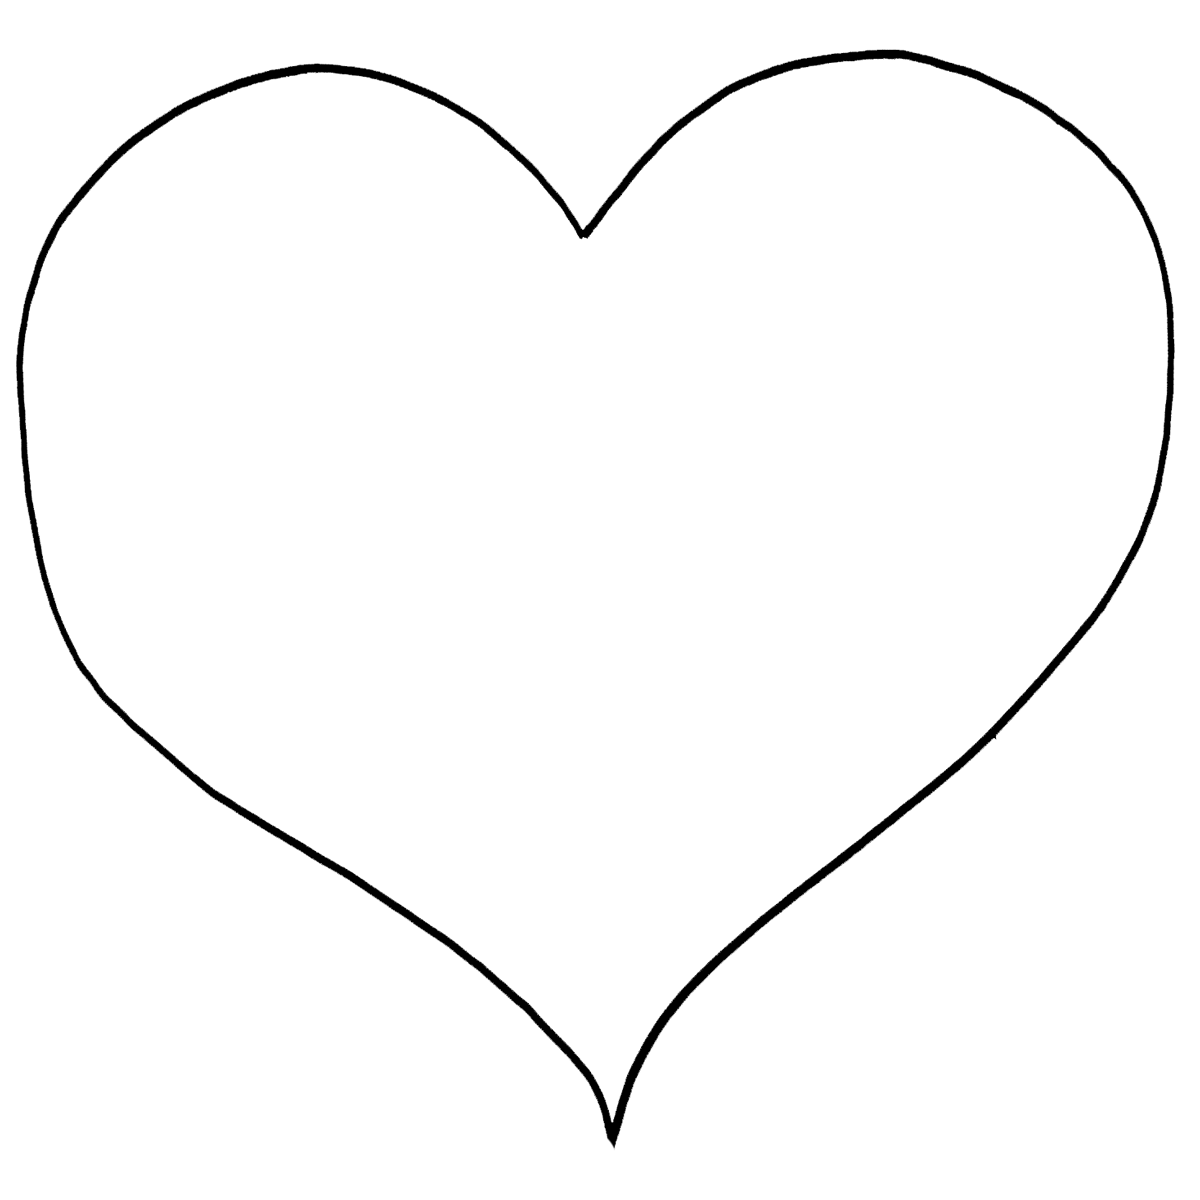 heart coloring pictures free printable heart coloring pages for kids pictures coloring heart 